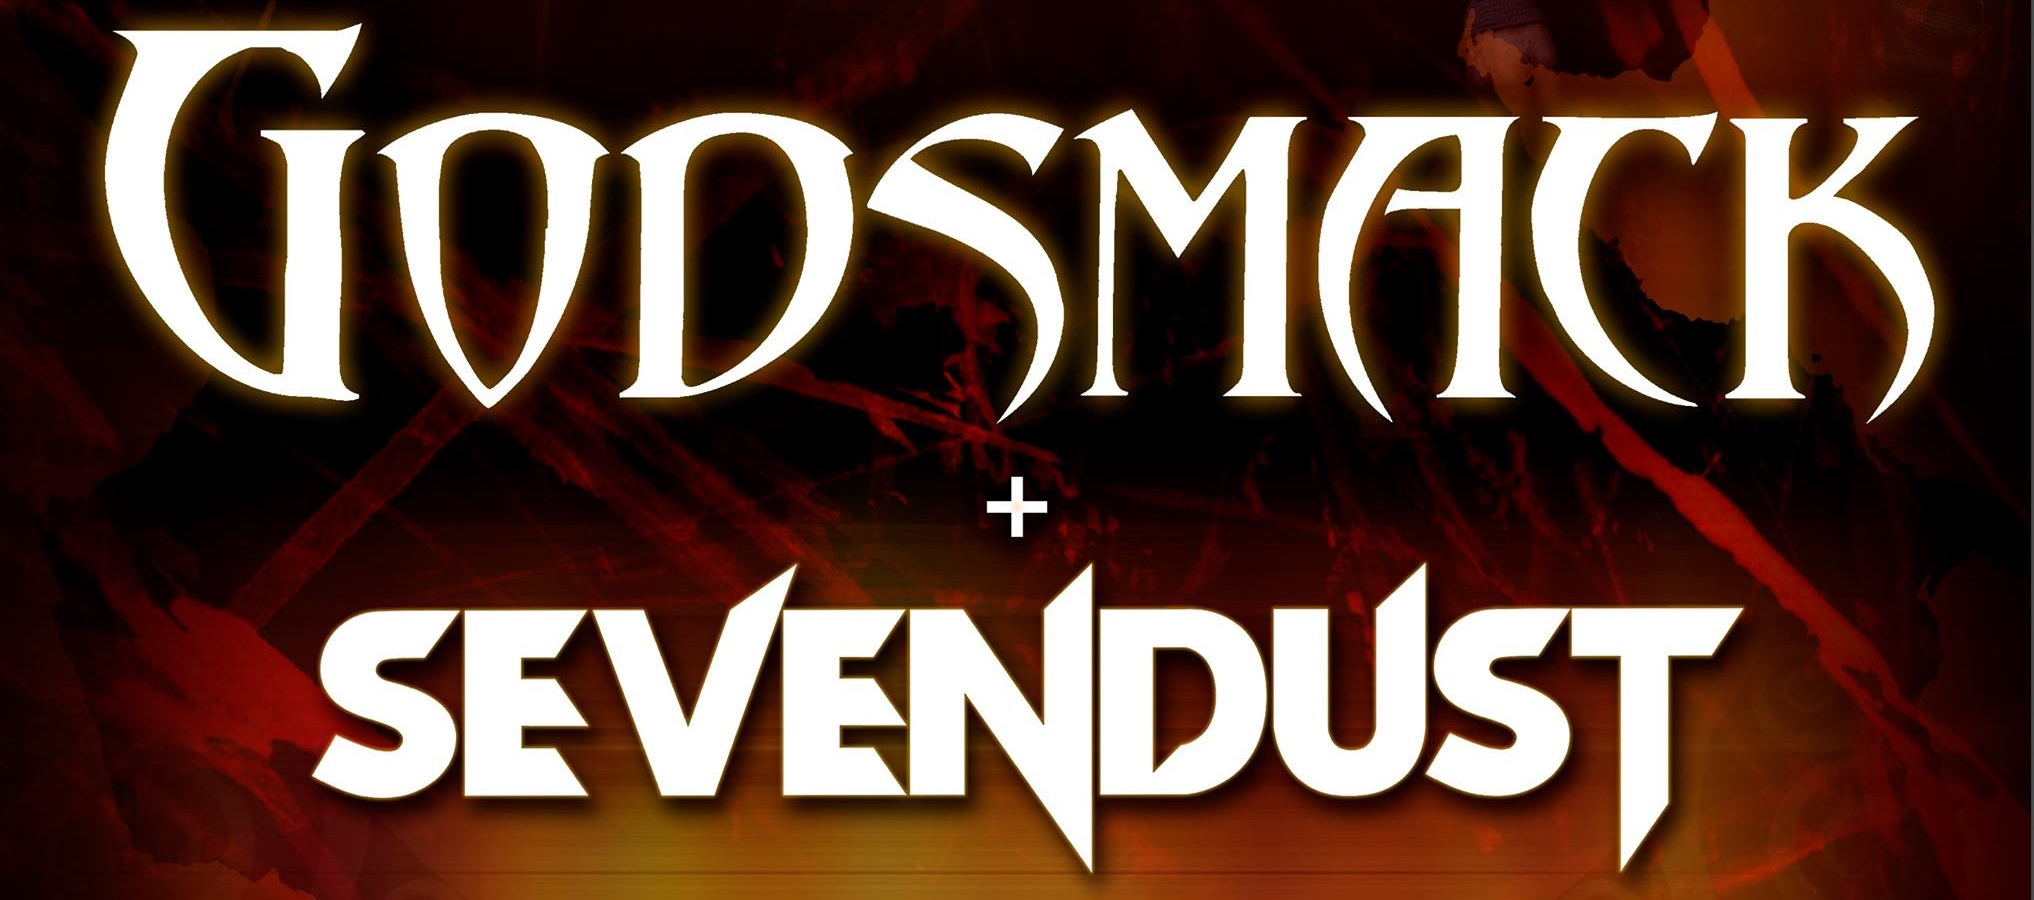 GODSMACK and SEVENDUST ANNOUNCE 2015 FALL NORTH AMERICAN TOUR